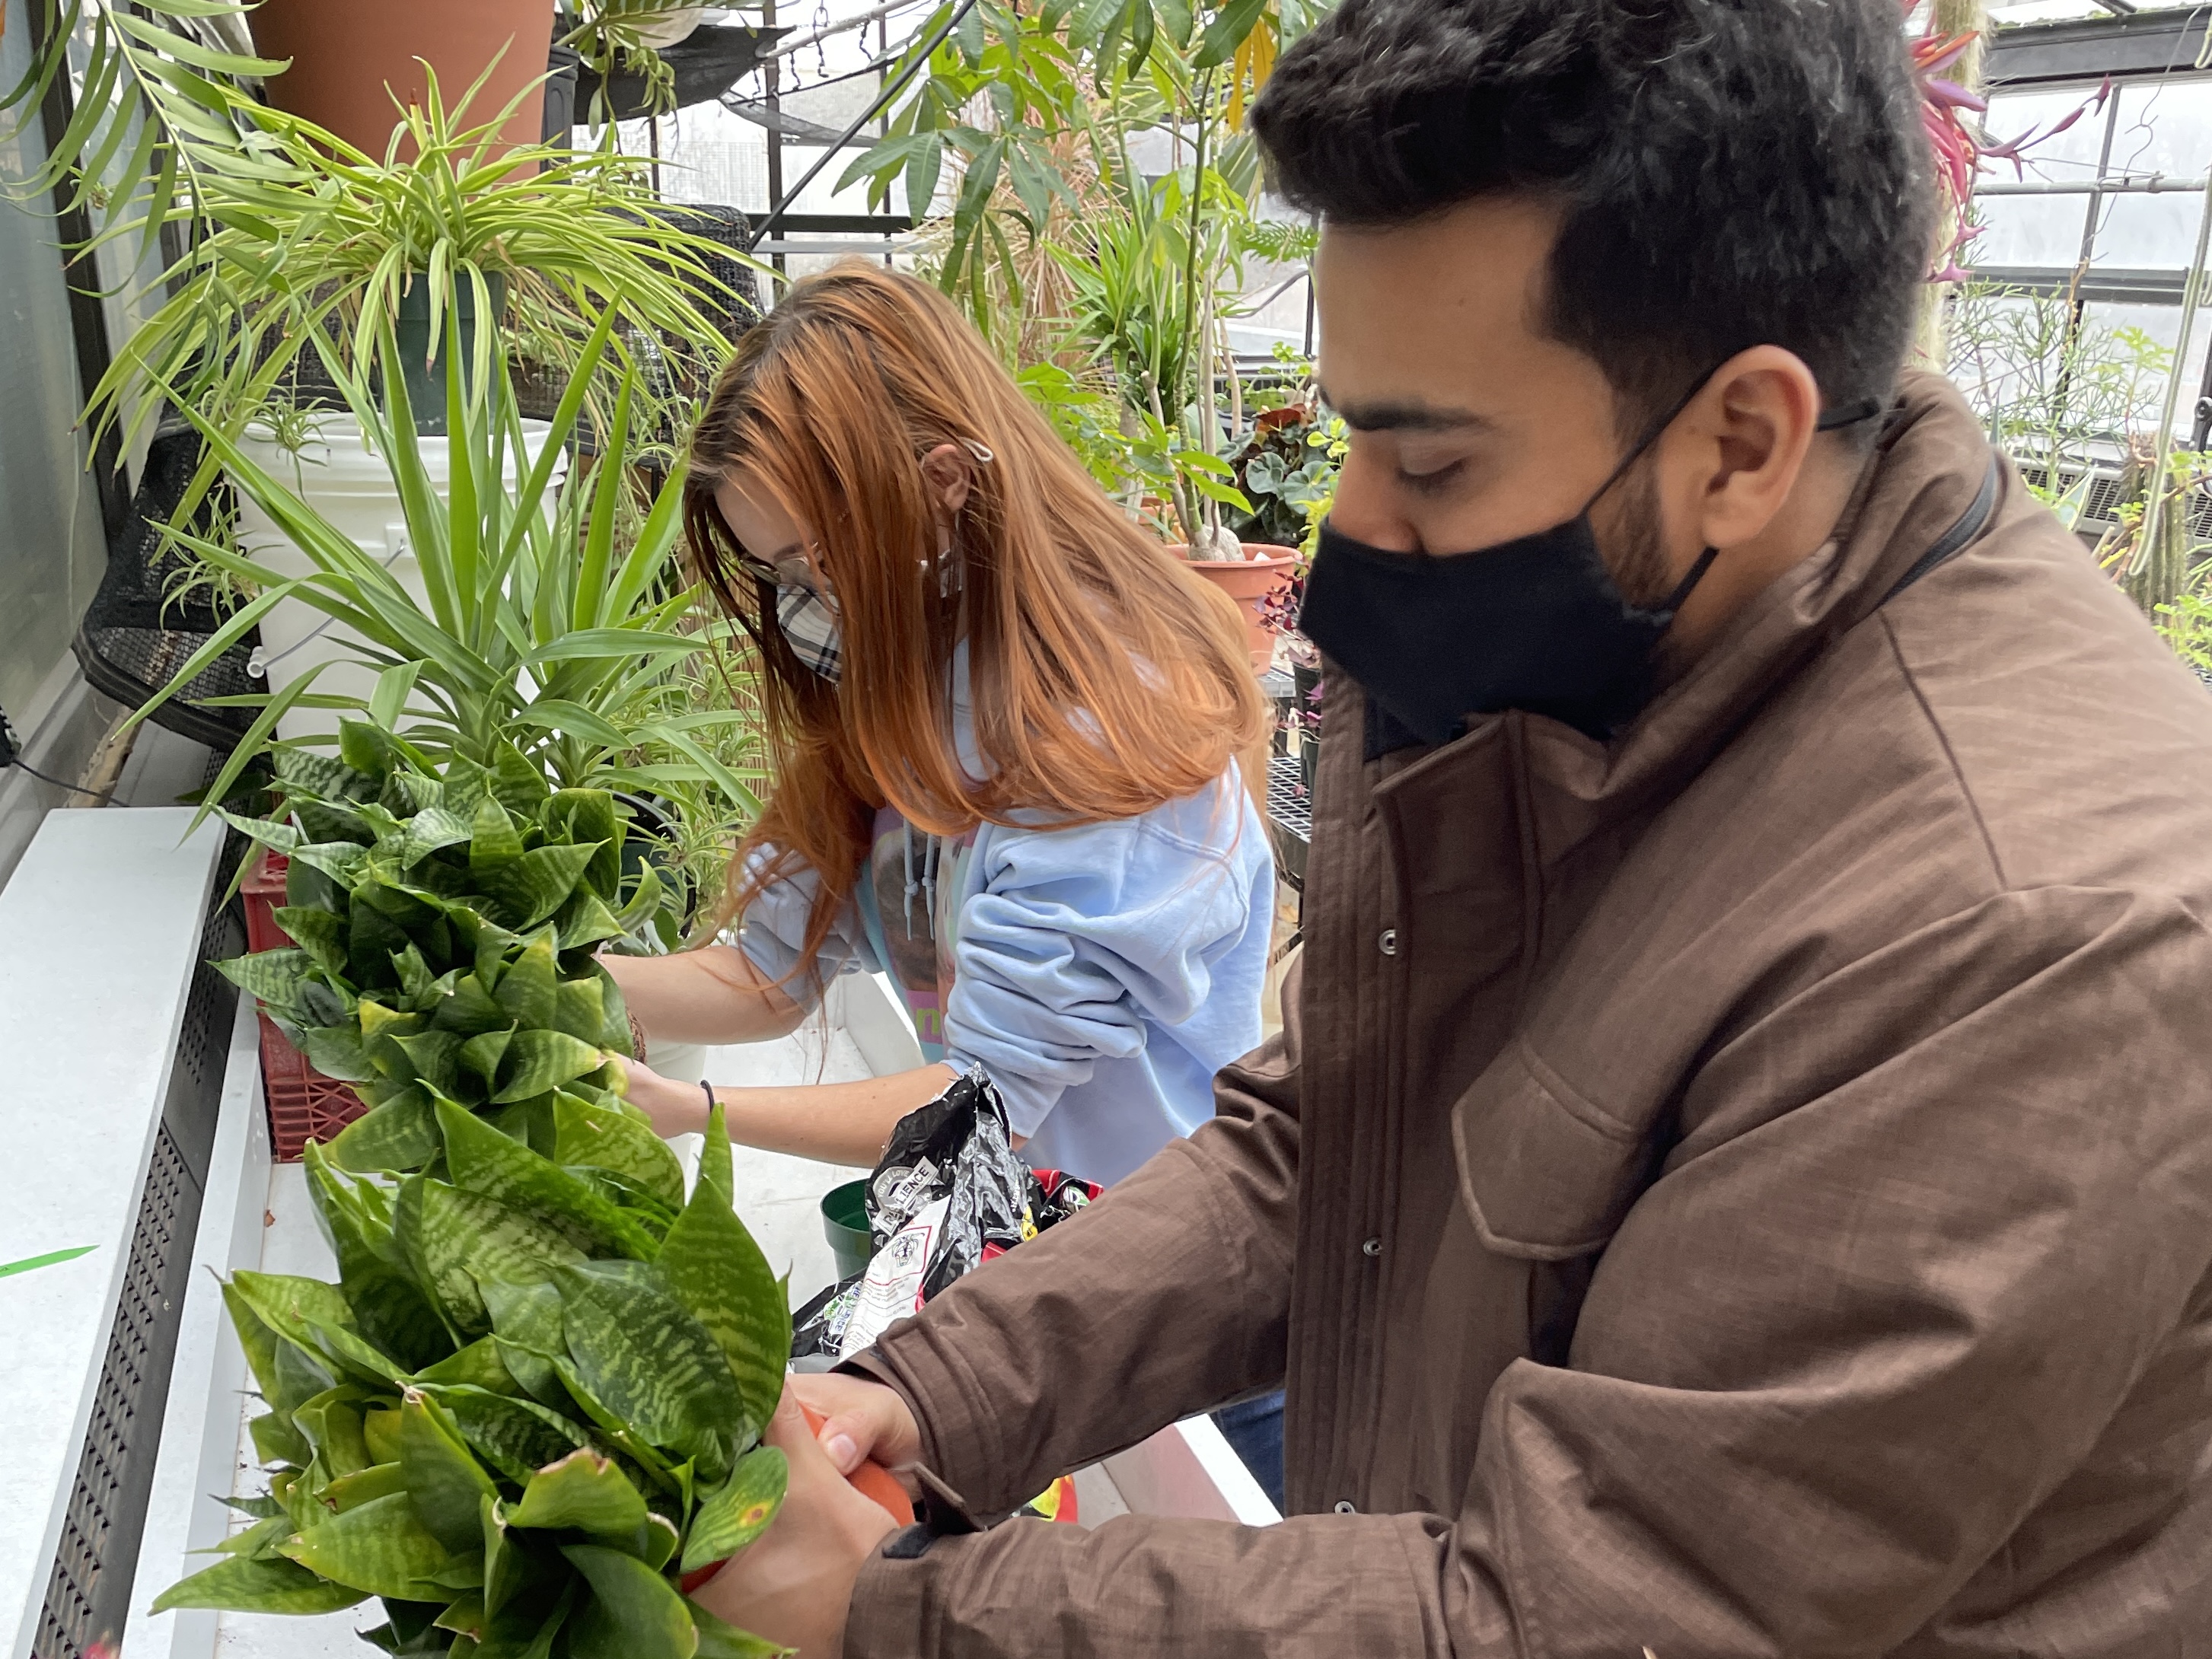 HCC Biology students, Jay and Keshav, examine green leafed plants in the HCC Greenhouse